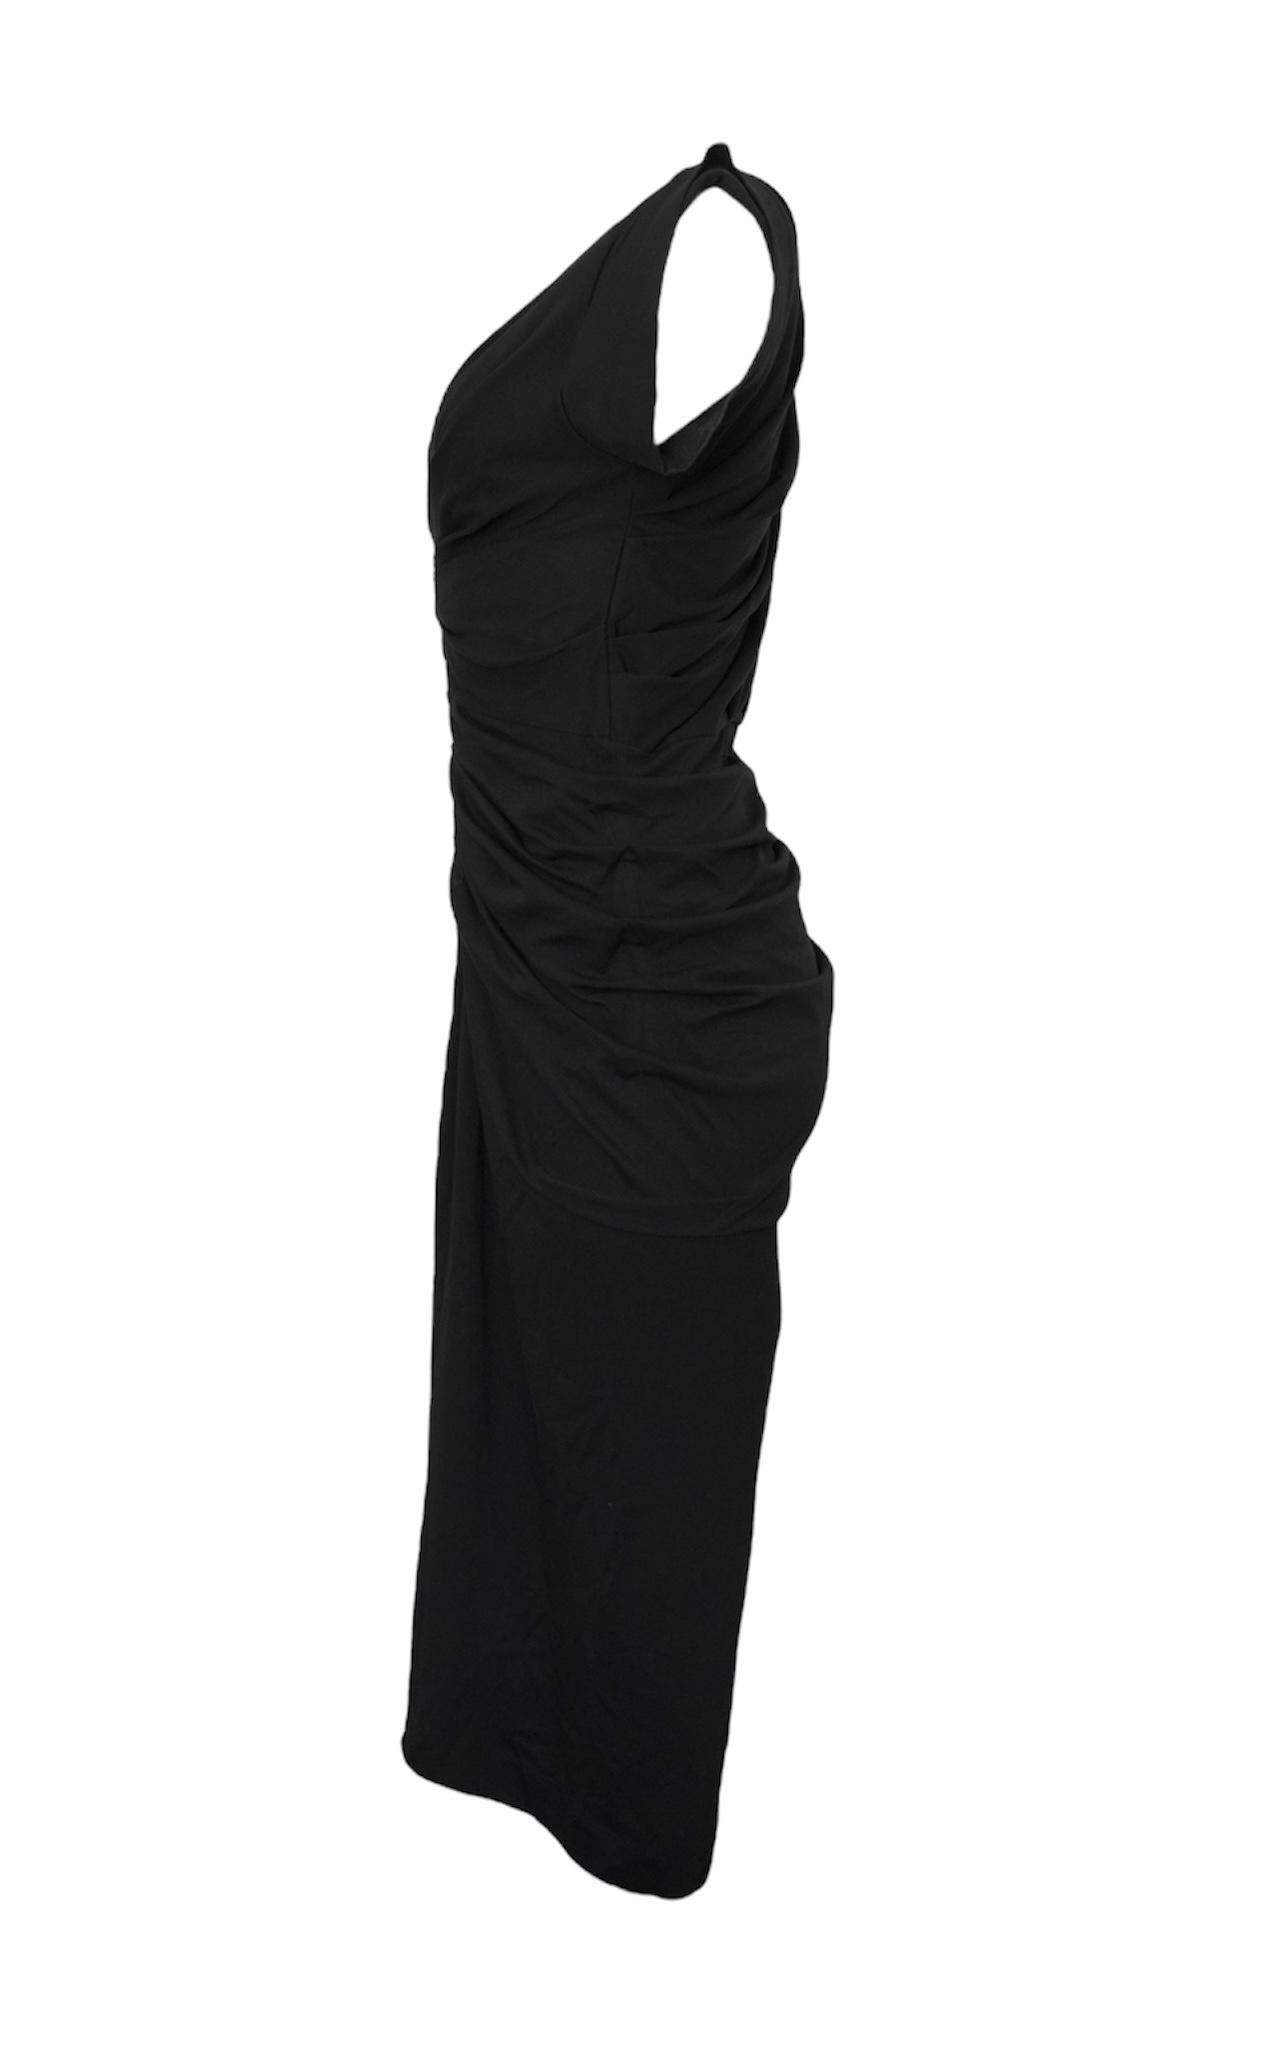 Dries Van Noten Black Ruched Midi Deep V Dress.
Front Center Zip
Beautiful pleating and draping throughout
Shoulder details
Double-lined throughout the chest
Size Medium
Length: 49 inches
Bust: 34 inches
Waist: 30 inches
100% cotton
Made in Turkey